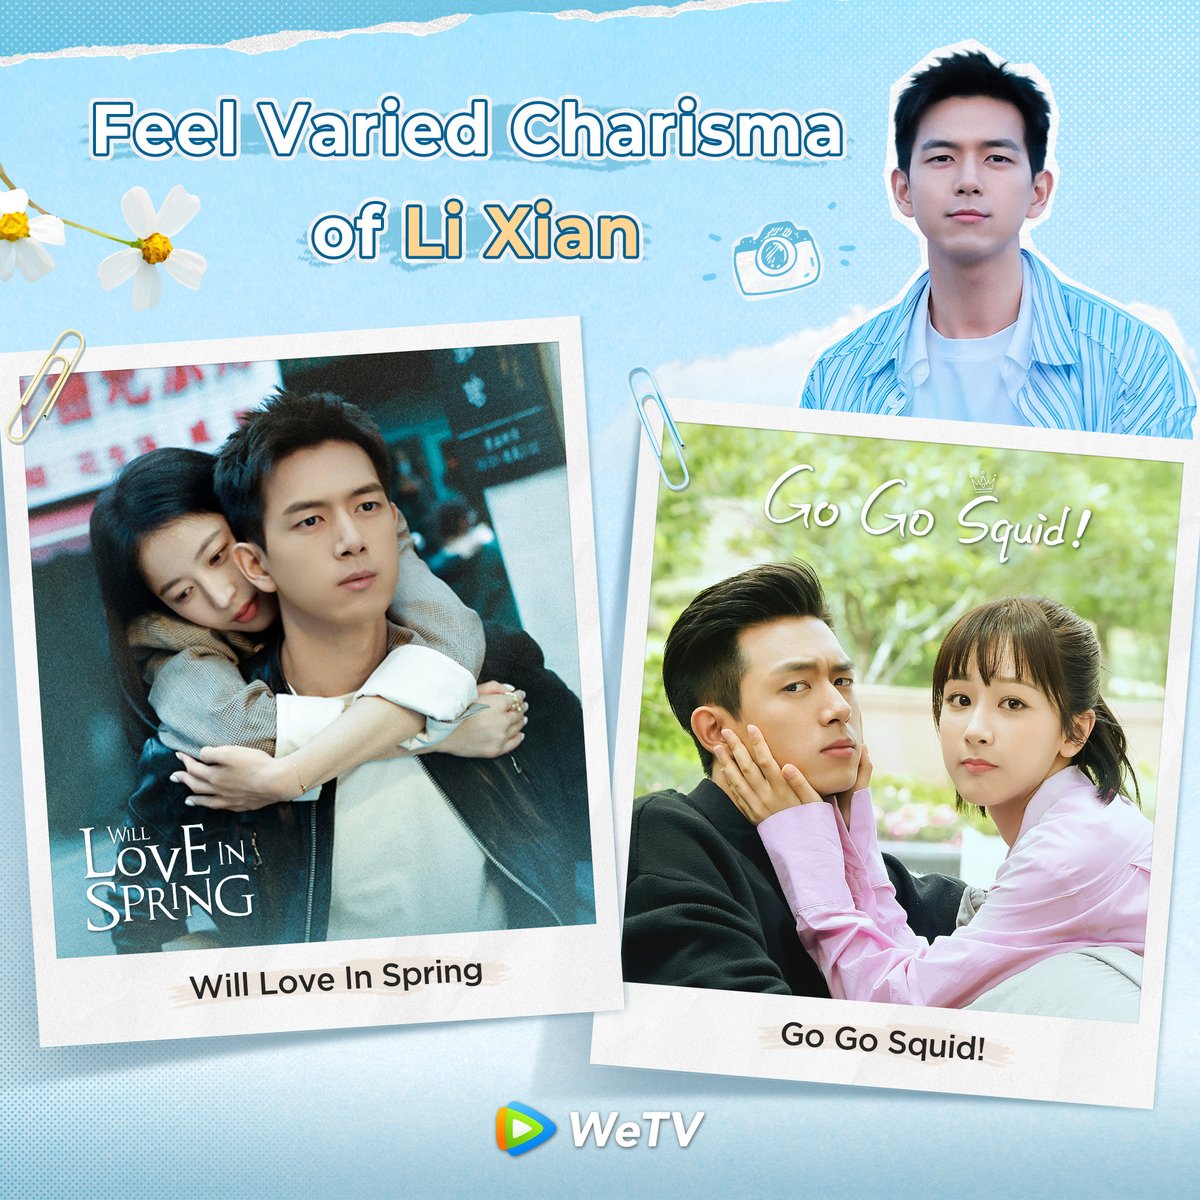 Come Feel Varied Charisma of #LiXian❣️

#WillLoveInSpring is streaming now on WeTV👉lihi.cc/Q5ZLp

#李现 #春色寄情人 #GoGoSquid #亲爱的热爱的 #WeTVSpecial #WeTV #WeTVAlwaysMore